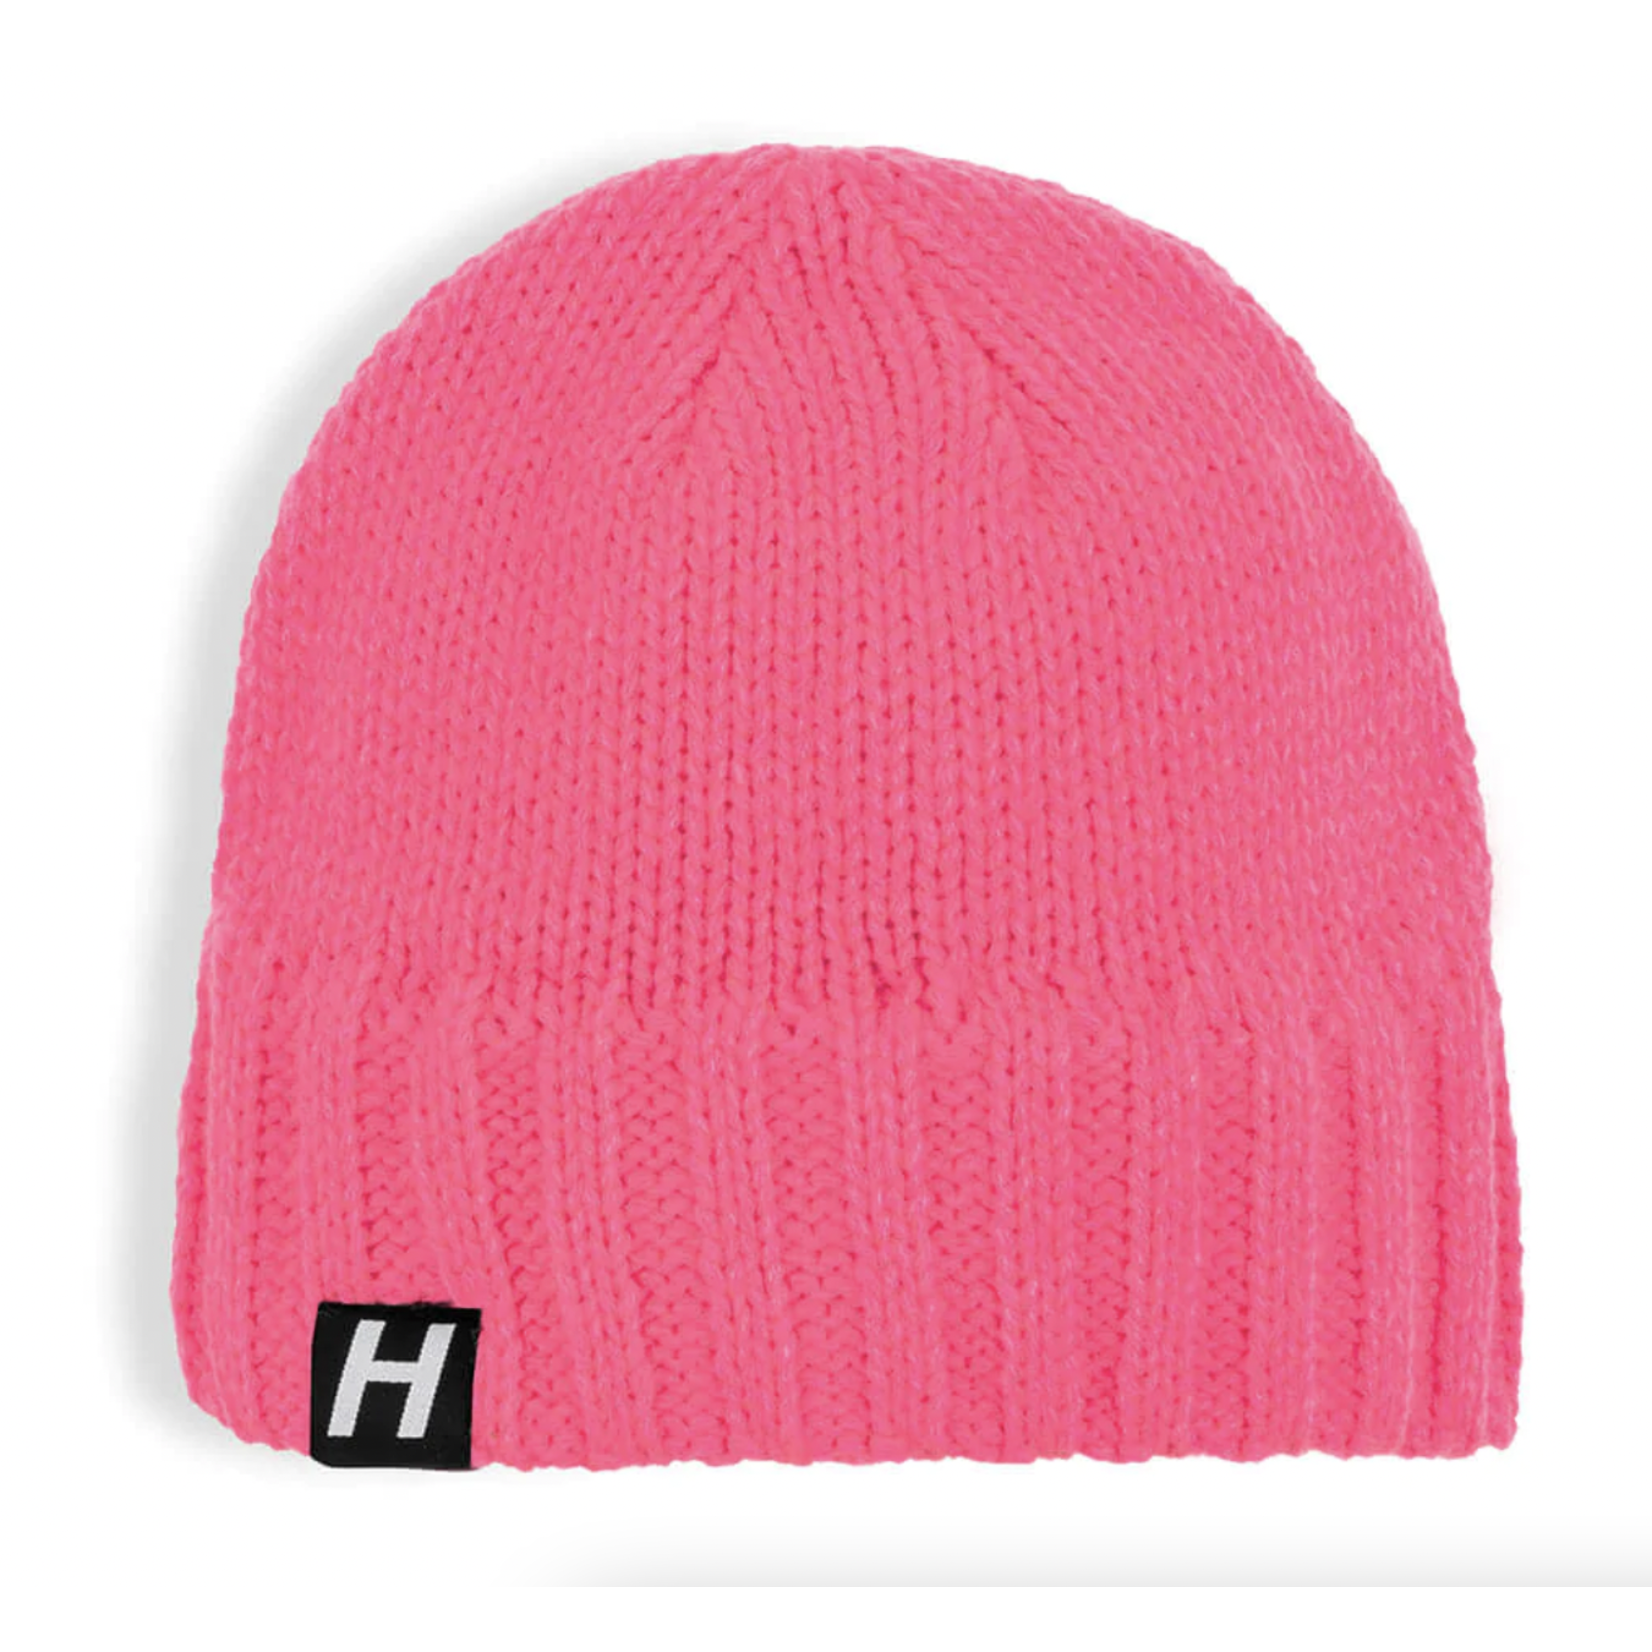 Beanie Pink - Neon Brass Classic Owl The -